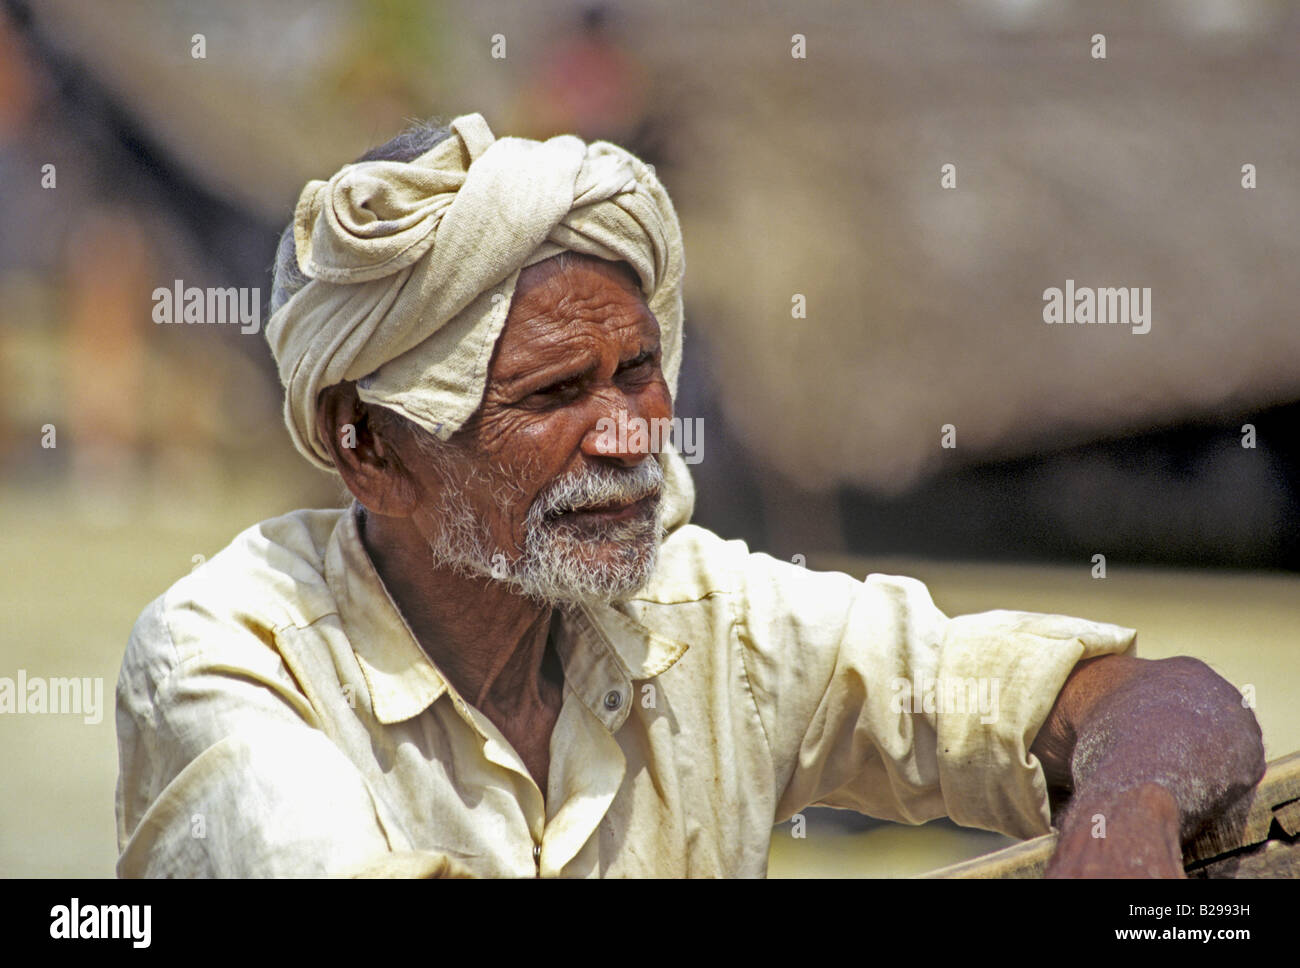 Local Man Goa State India Date 15 06 2008 Ref ZB548 115573 0110 COMPULSORY CREDIT World Pictures Photoshot Stock Photo